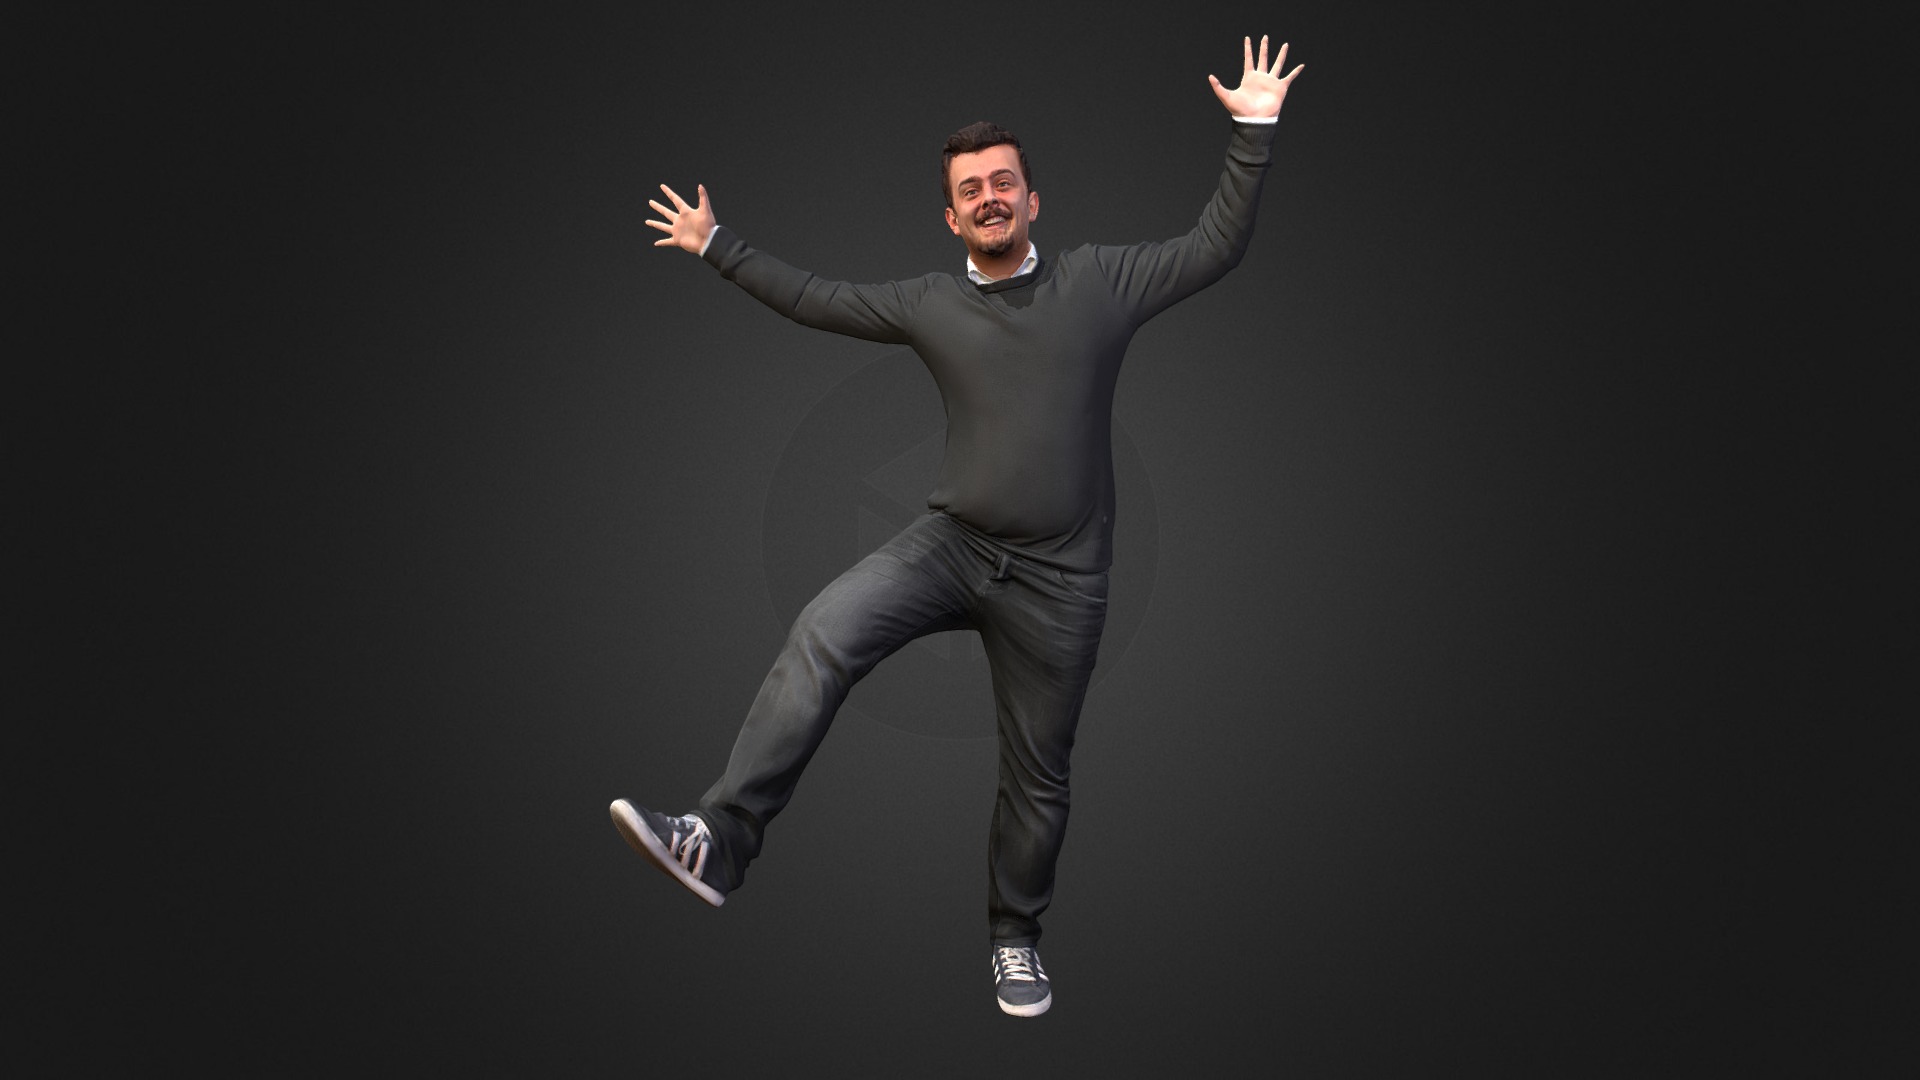 3D model No12 – Celebration Guy - This is a 3D model of the No12 - Celebration Guy. The 3D model is about a person jumping in the air.